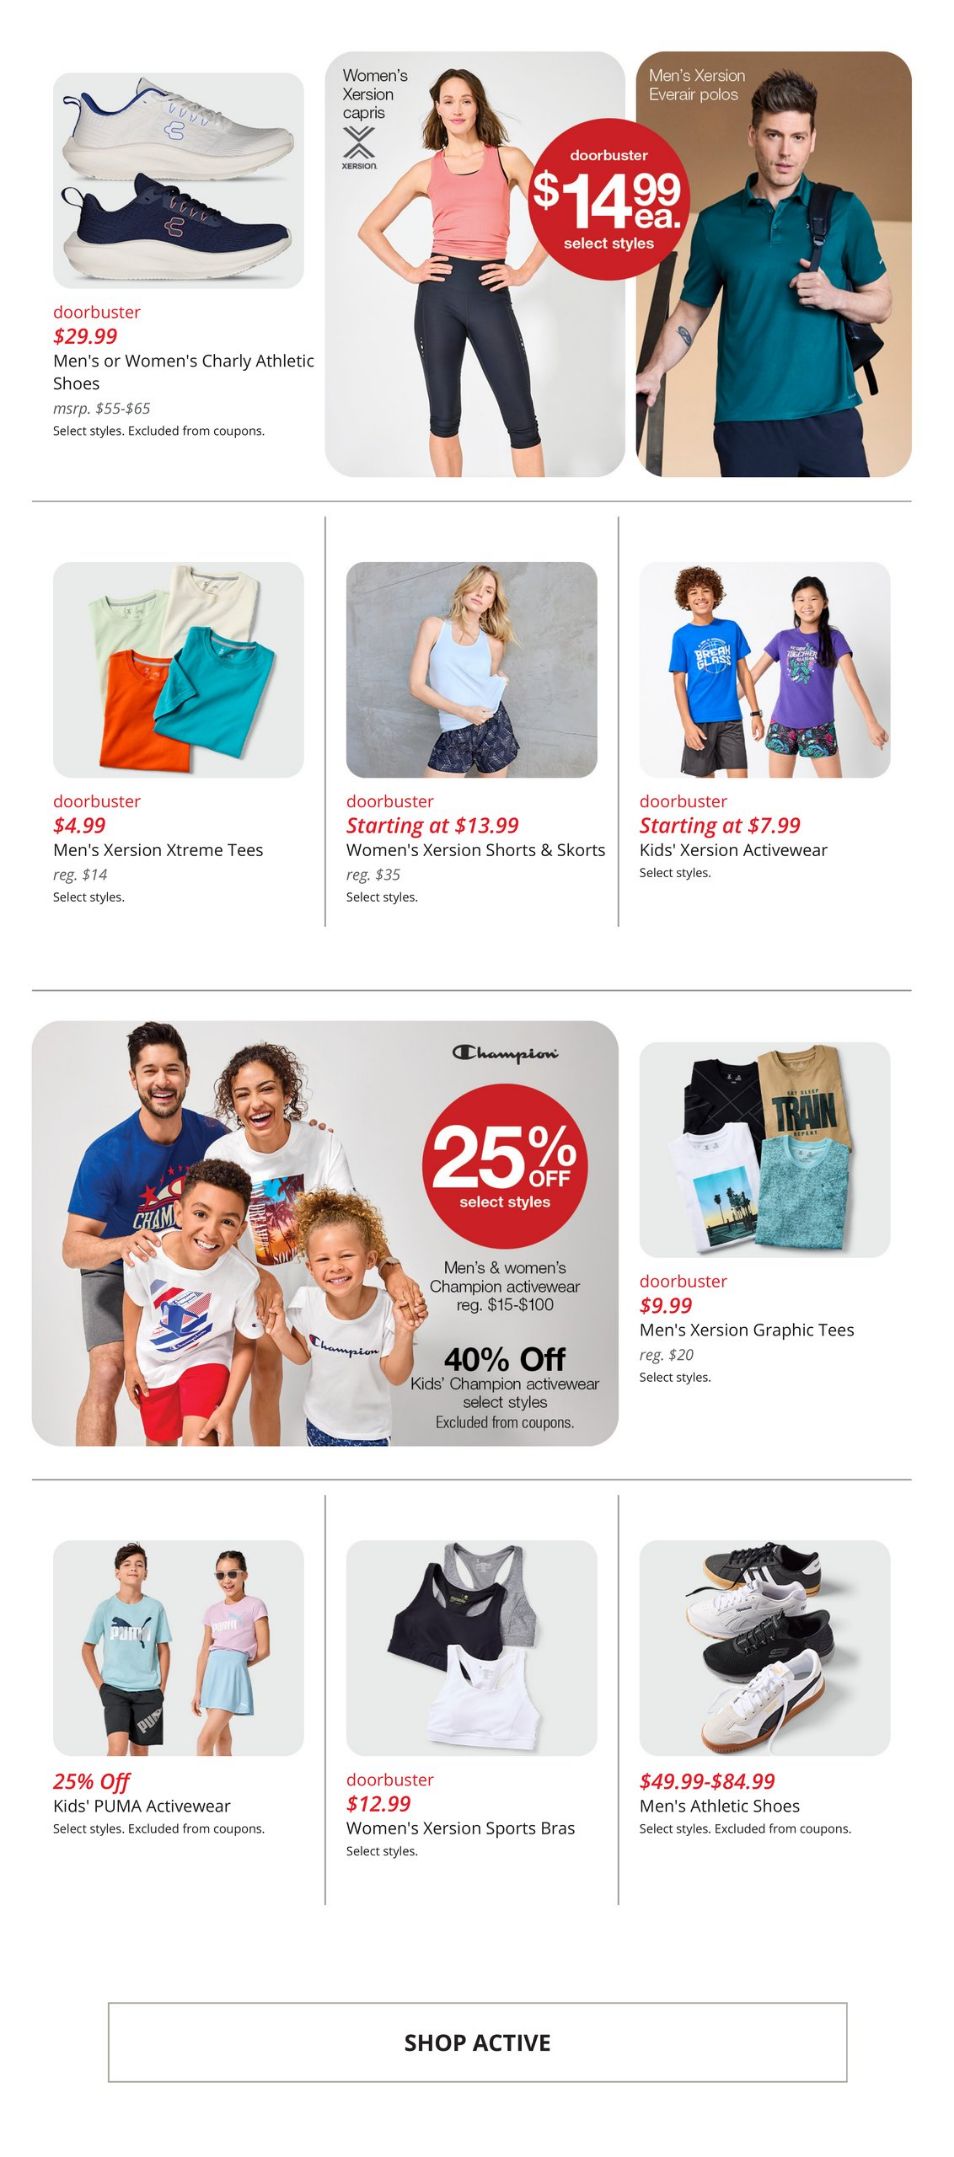 Weekly ad JC Penney 05/23/2024 - 05/27/2024